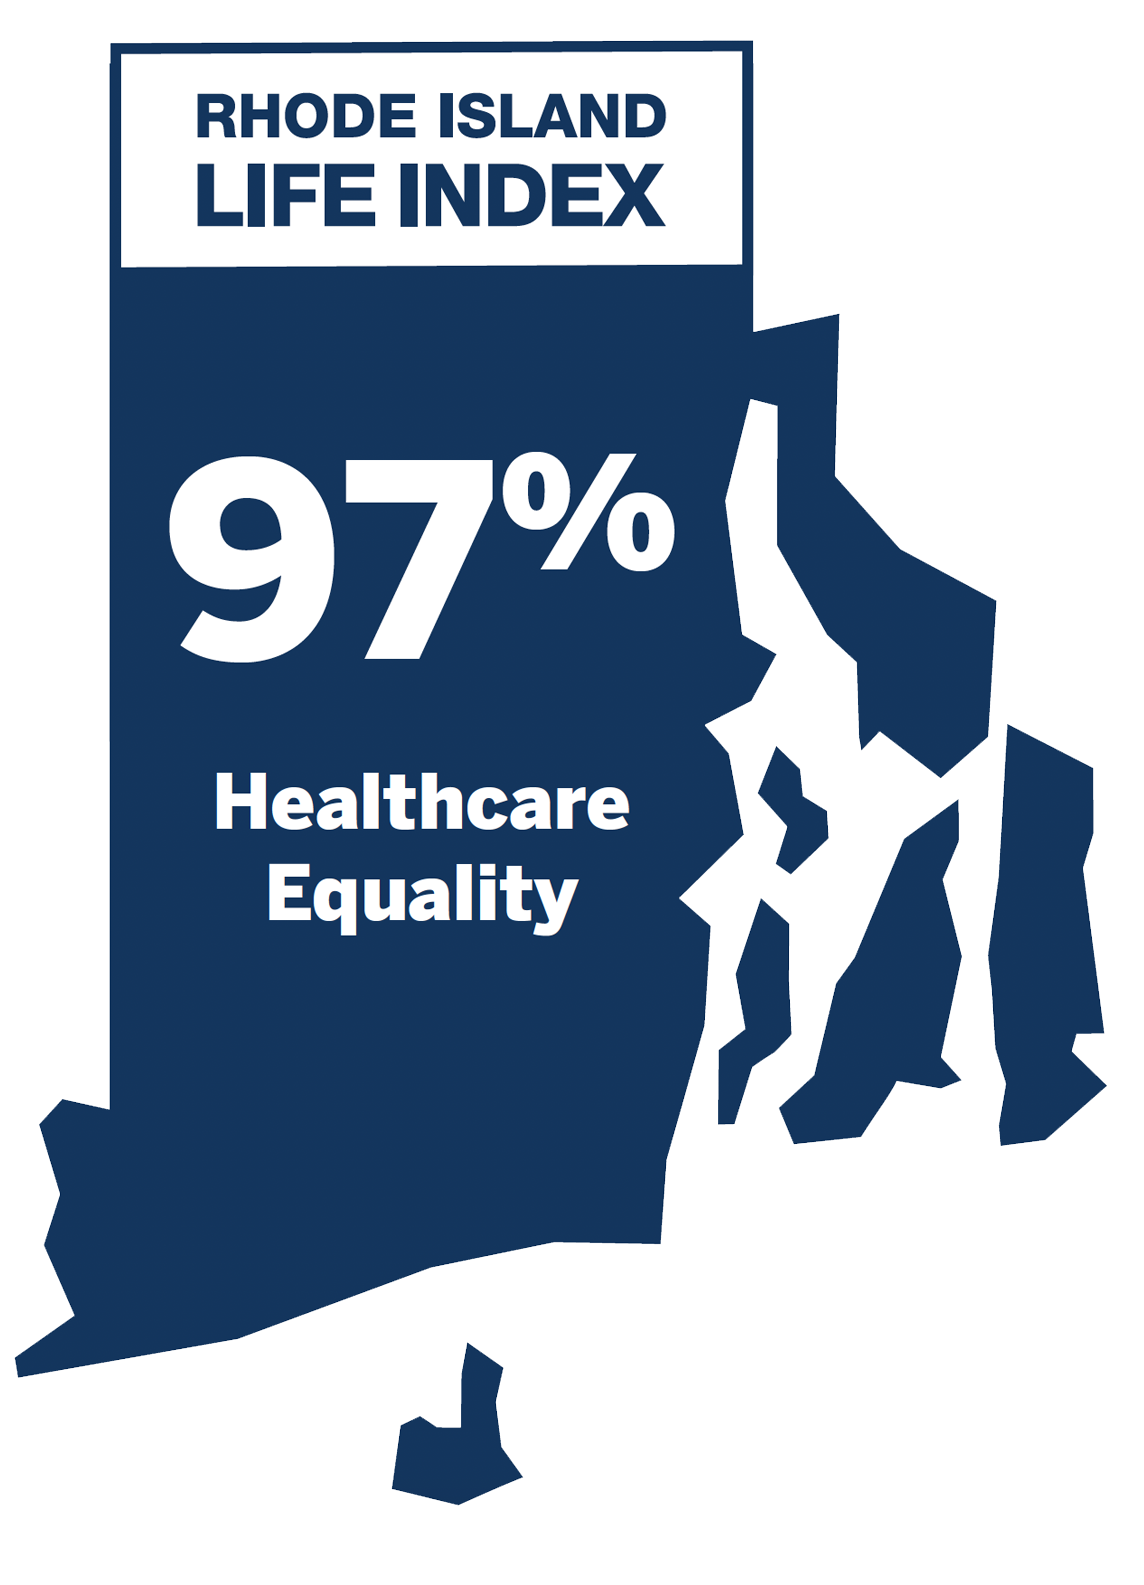 Healthcare Equality: 97%